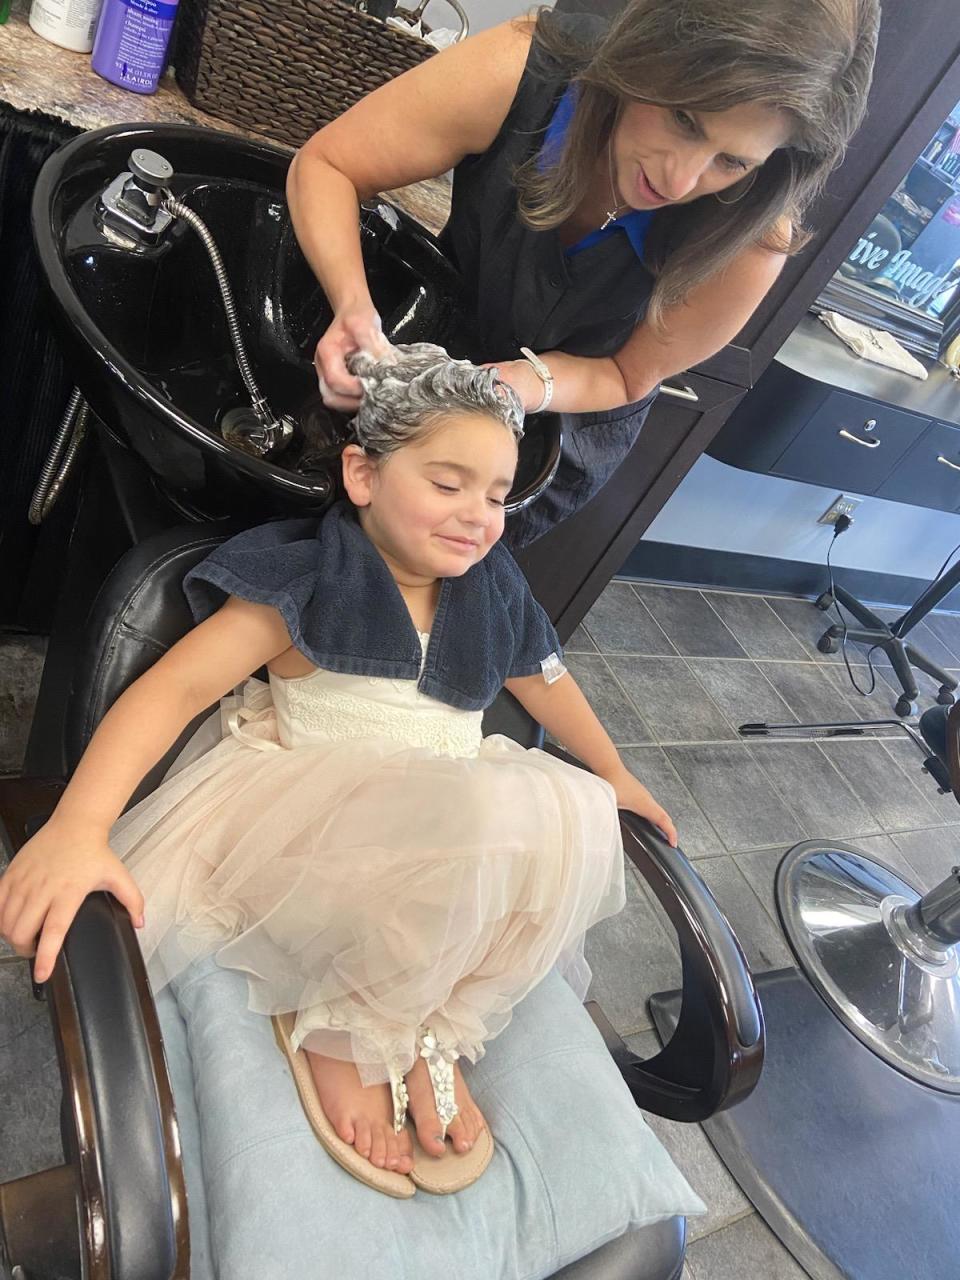 Ayla Robles, 5, gets her hair washed by Lisa Almeida of Positive Image Hair Design in Brockton. Ayla is donating her hair to Locks of Love, on Aug. 11, 2023.